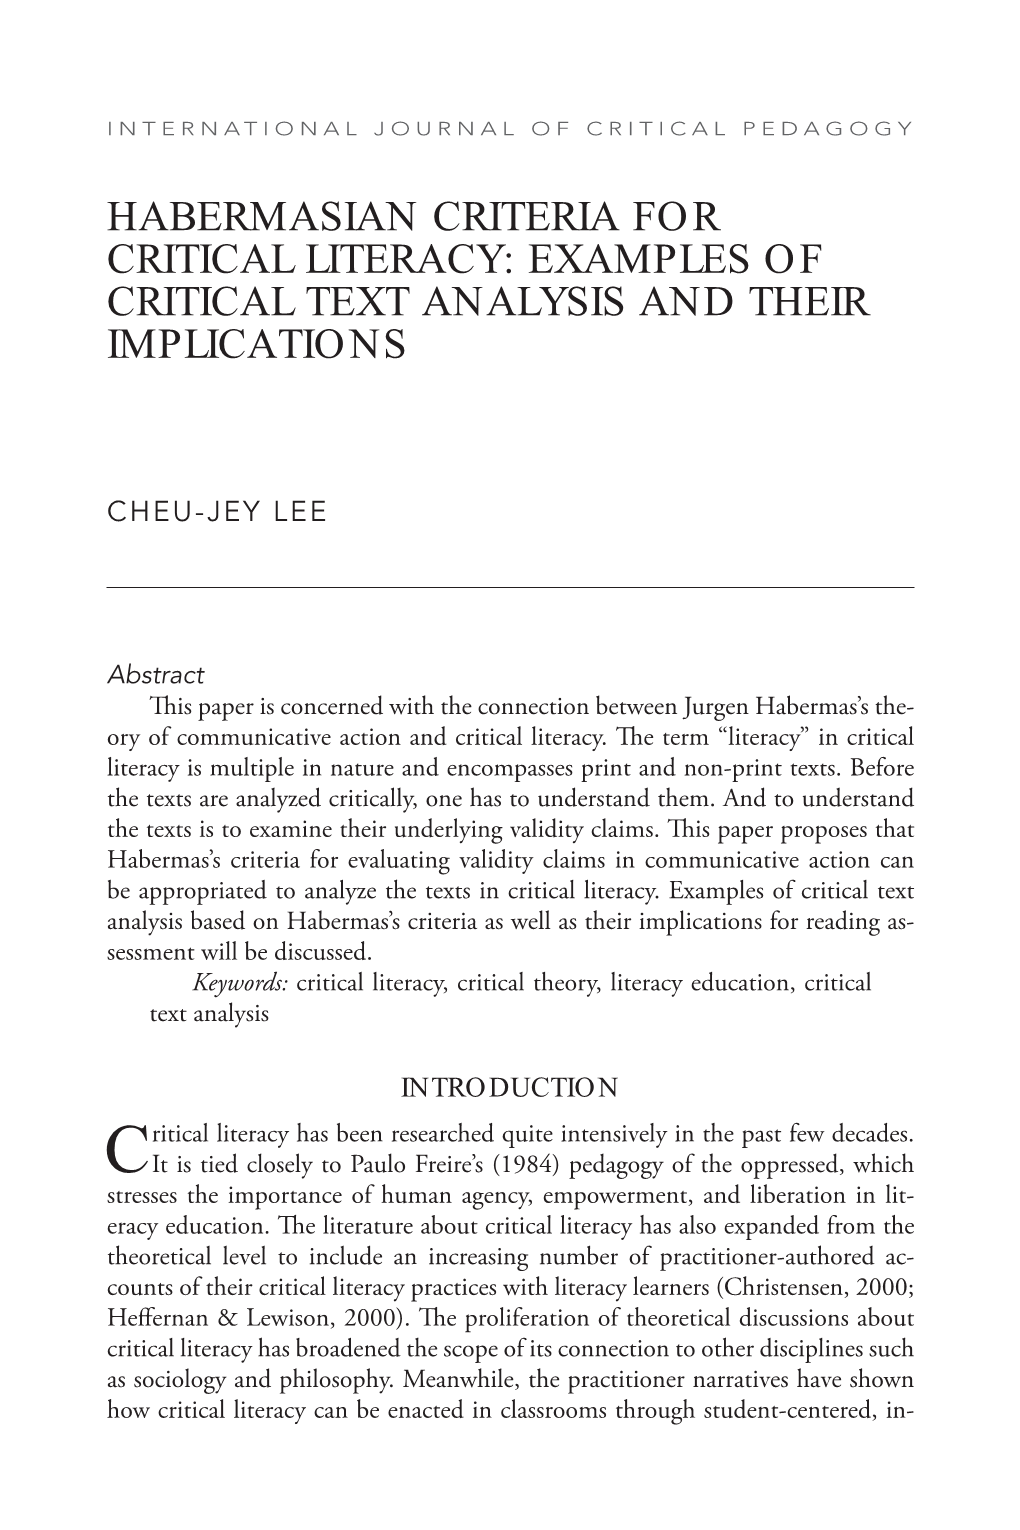 Habermasian Criteria for Critical Literacy: Examples of Critical Text Analysis and Their Implications